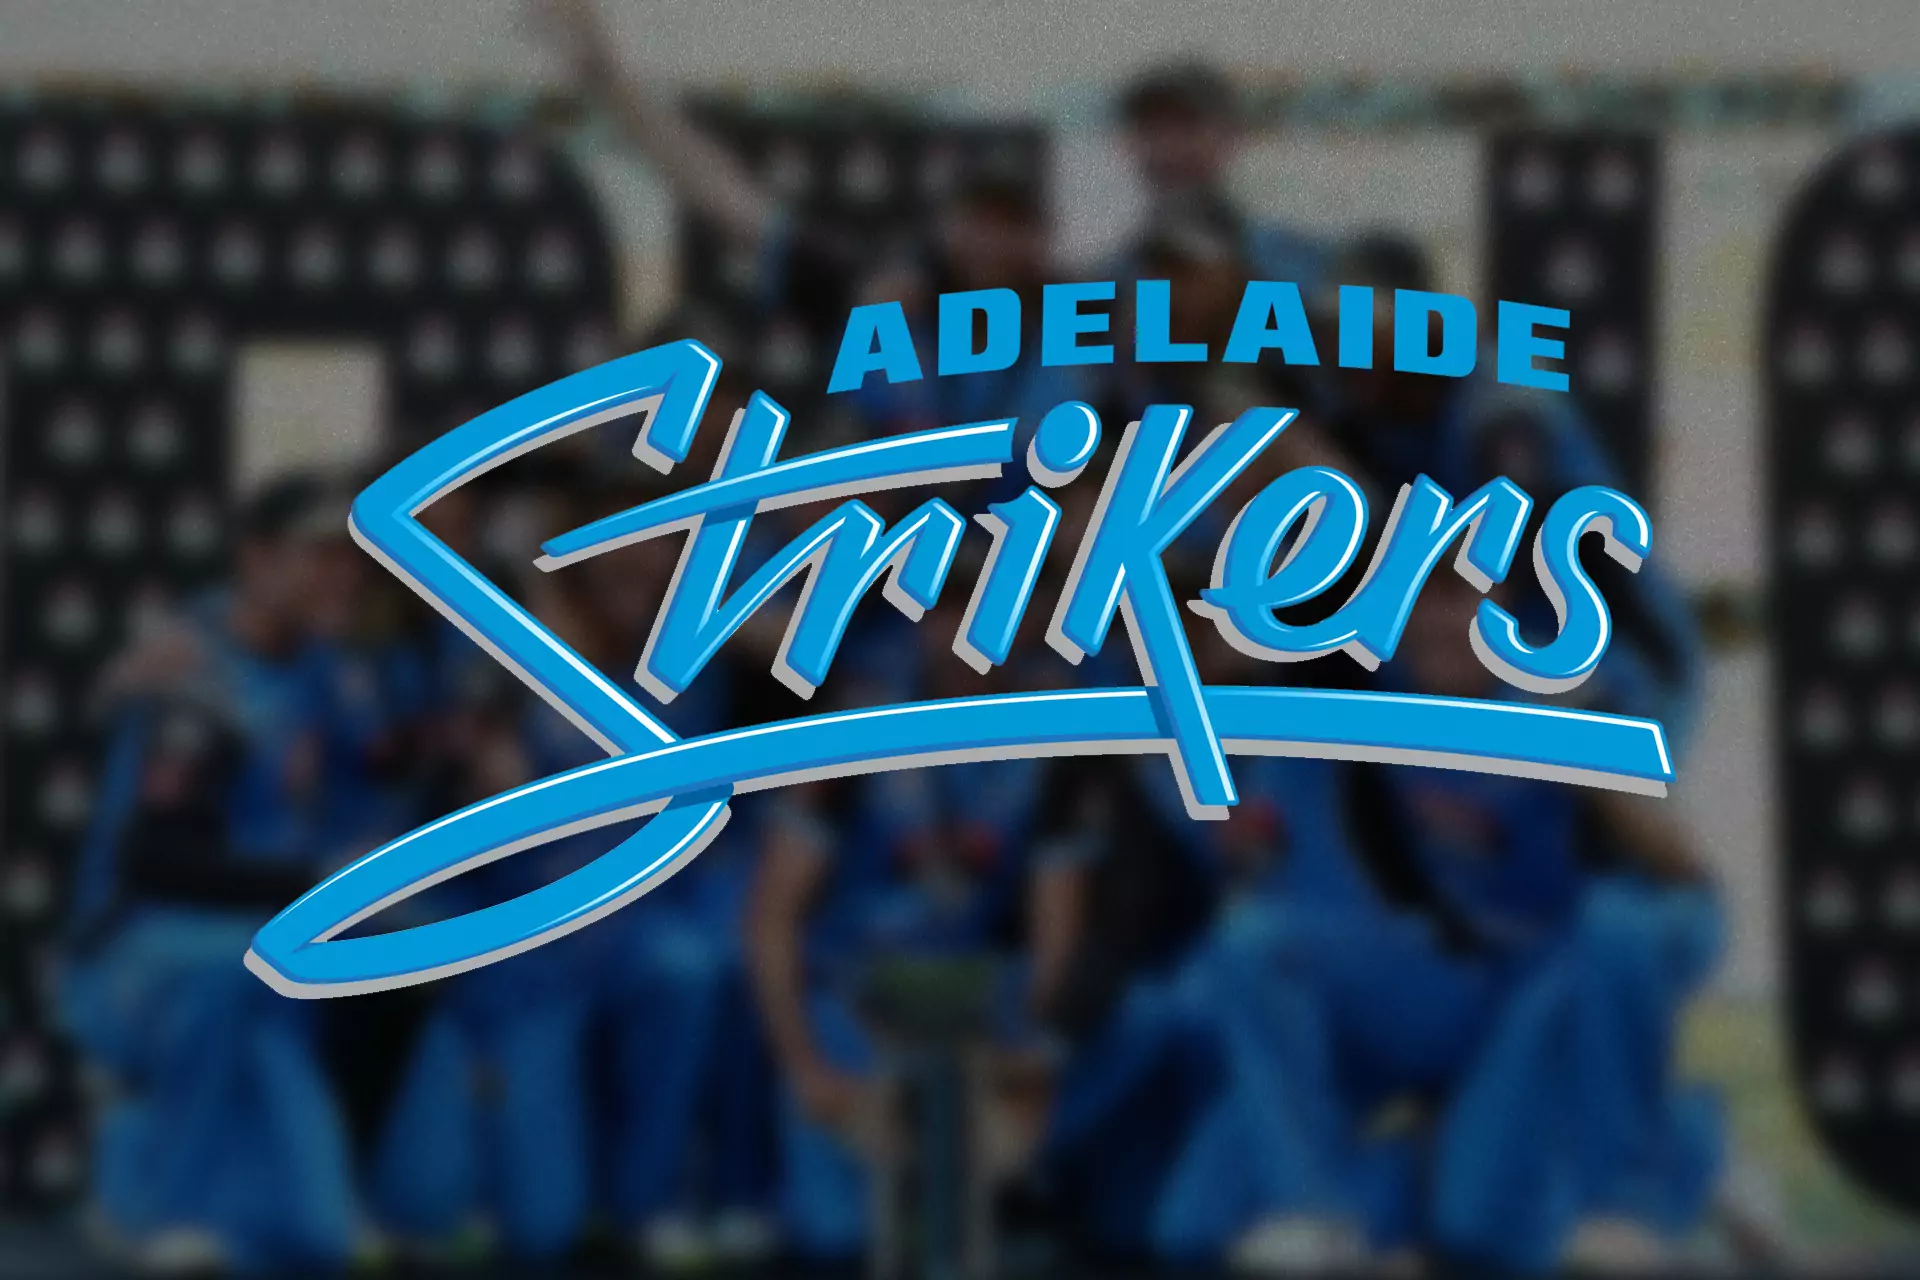 The Adelaide Strikers team has already won the BBL a couple years ago.